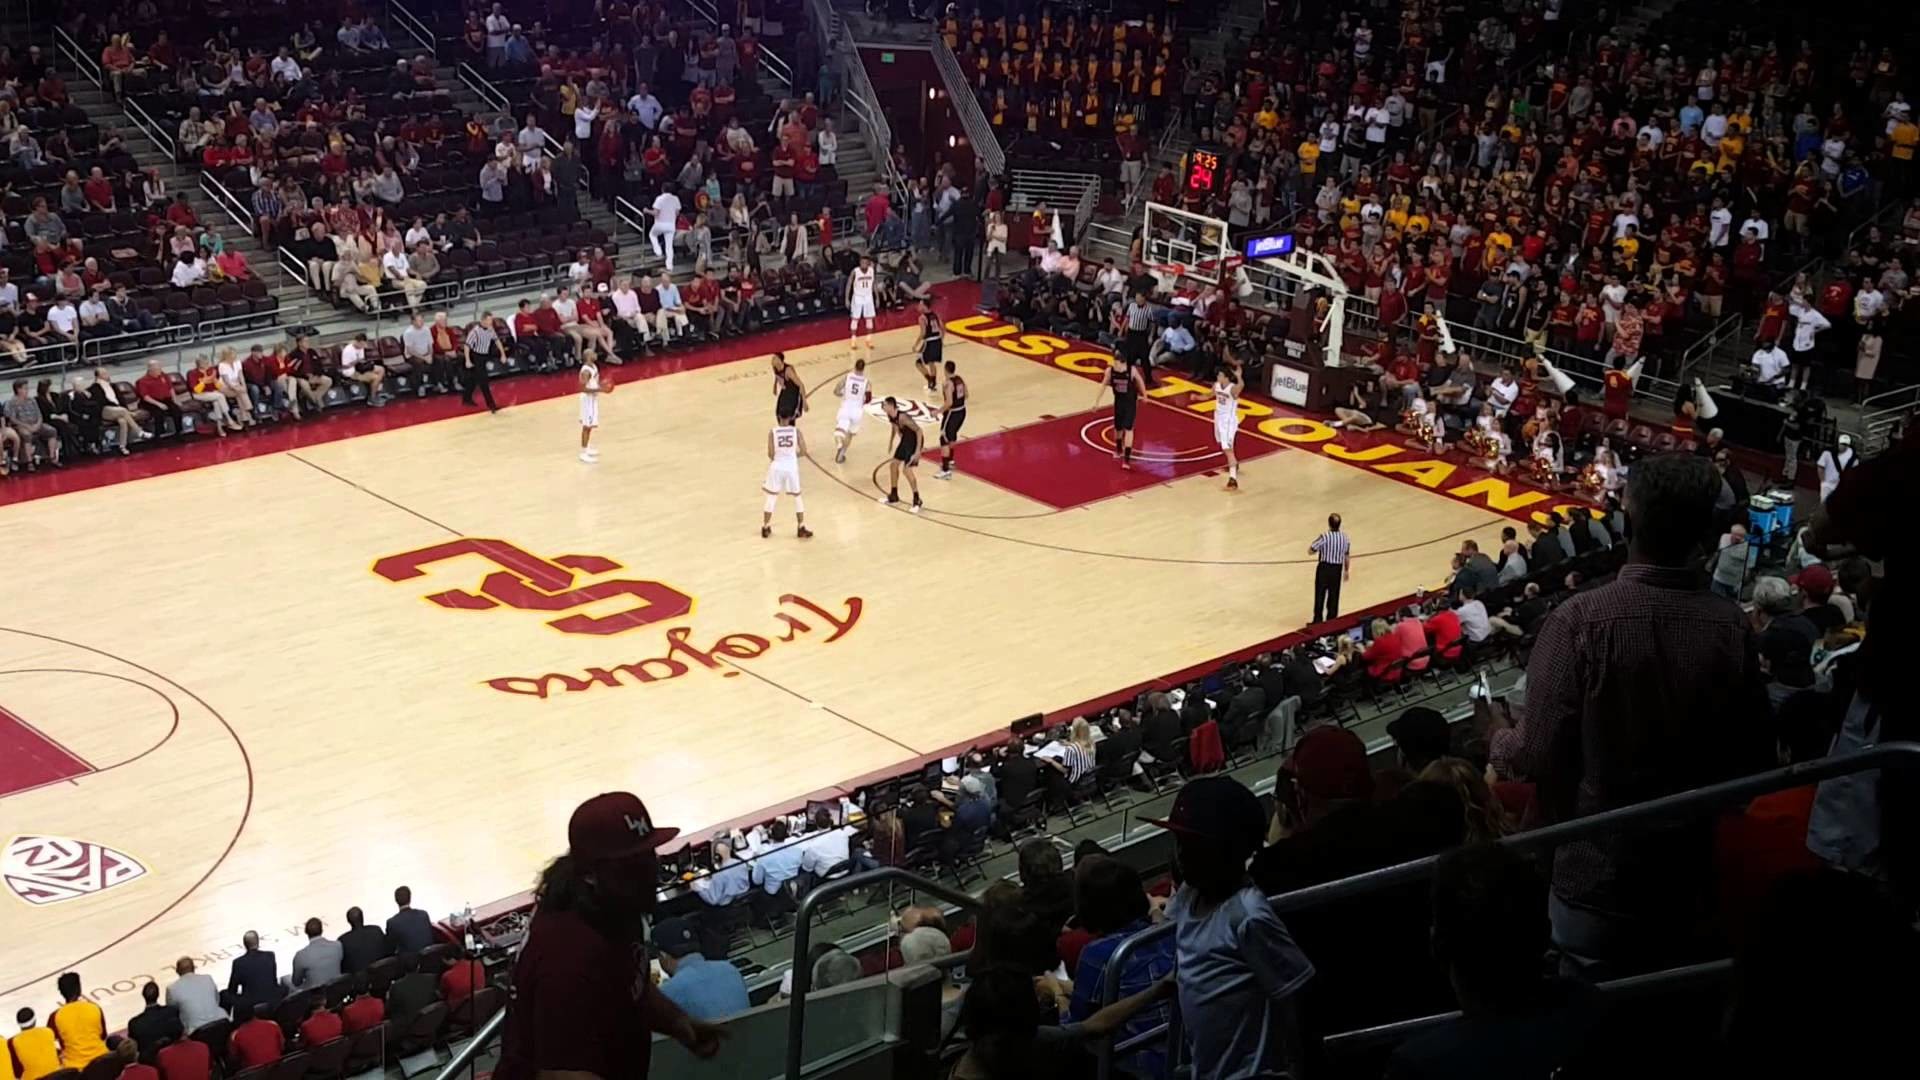 1920x1080 USC Trojans vs. Utah Utes Tip Off NCAA Basketball at Galen Center First  Minute 2-21-16